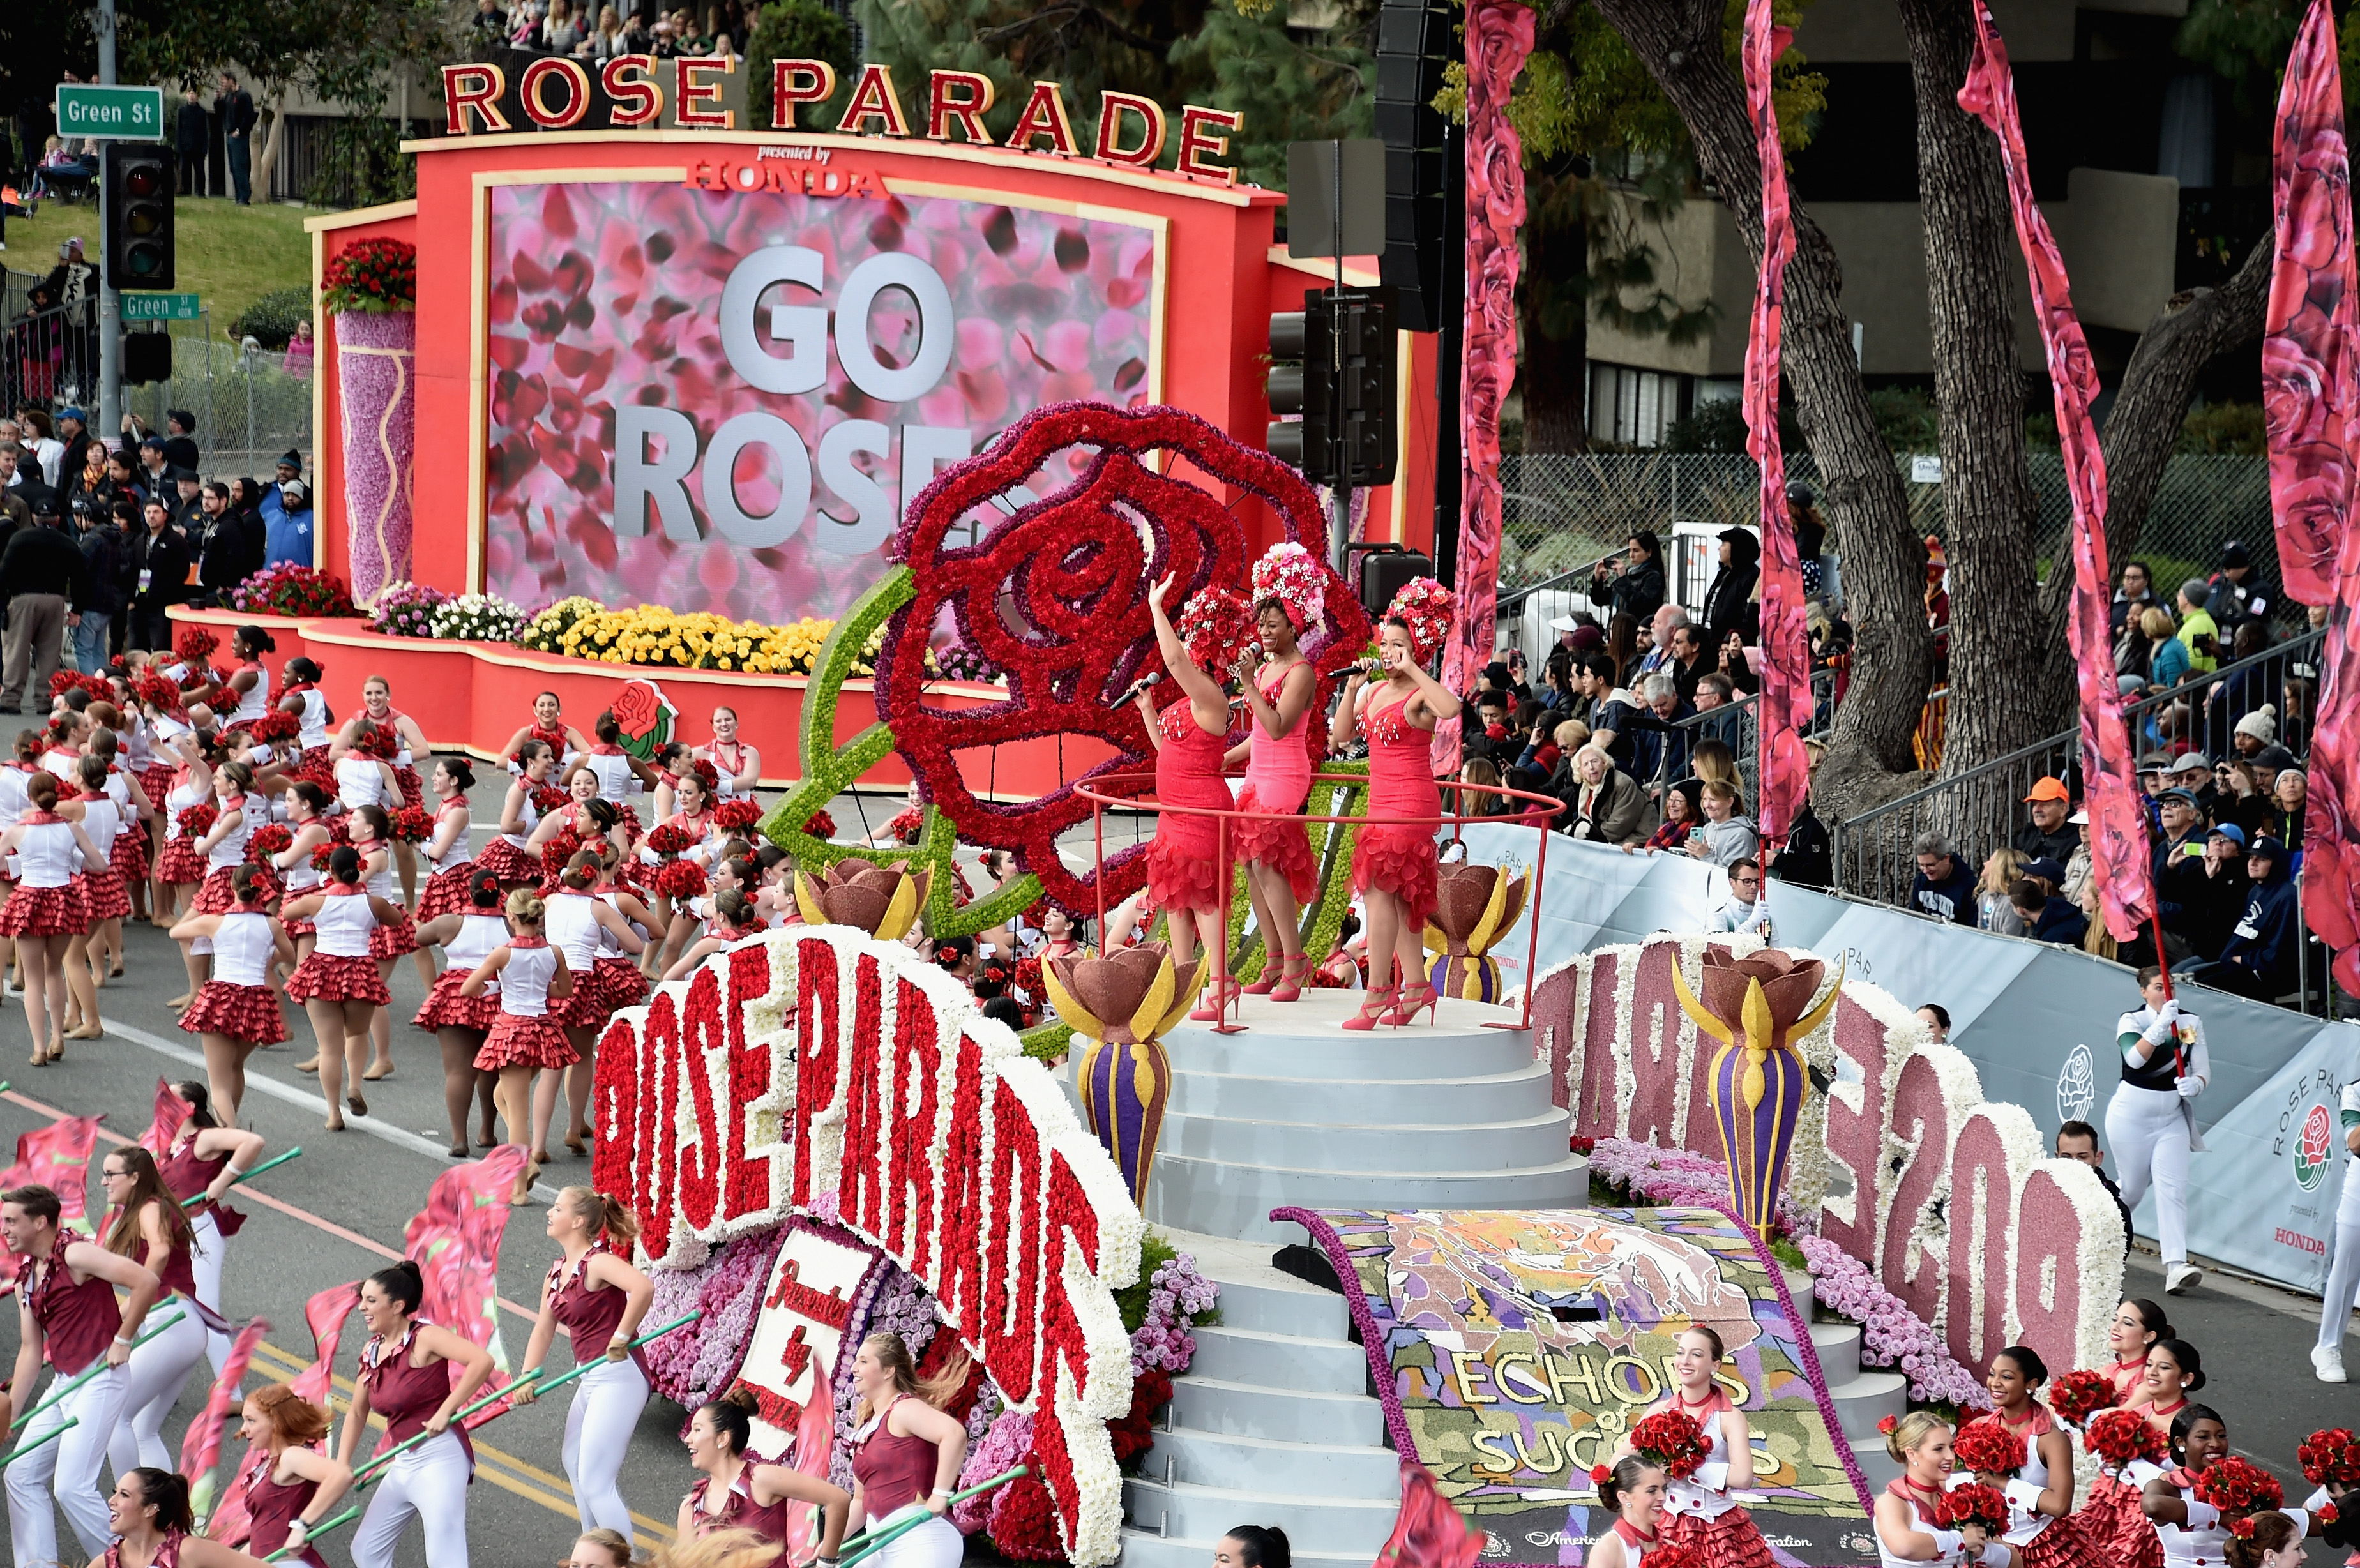 Performers open the 128th Tournament of Roses Parade Presented by Honda on Jan. 2, 2017, in Pasadena, California. (Credit: Alberto E. Rodriguez/Getty Images)